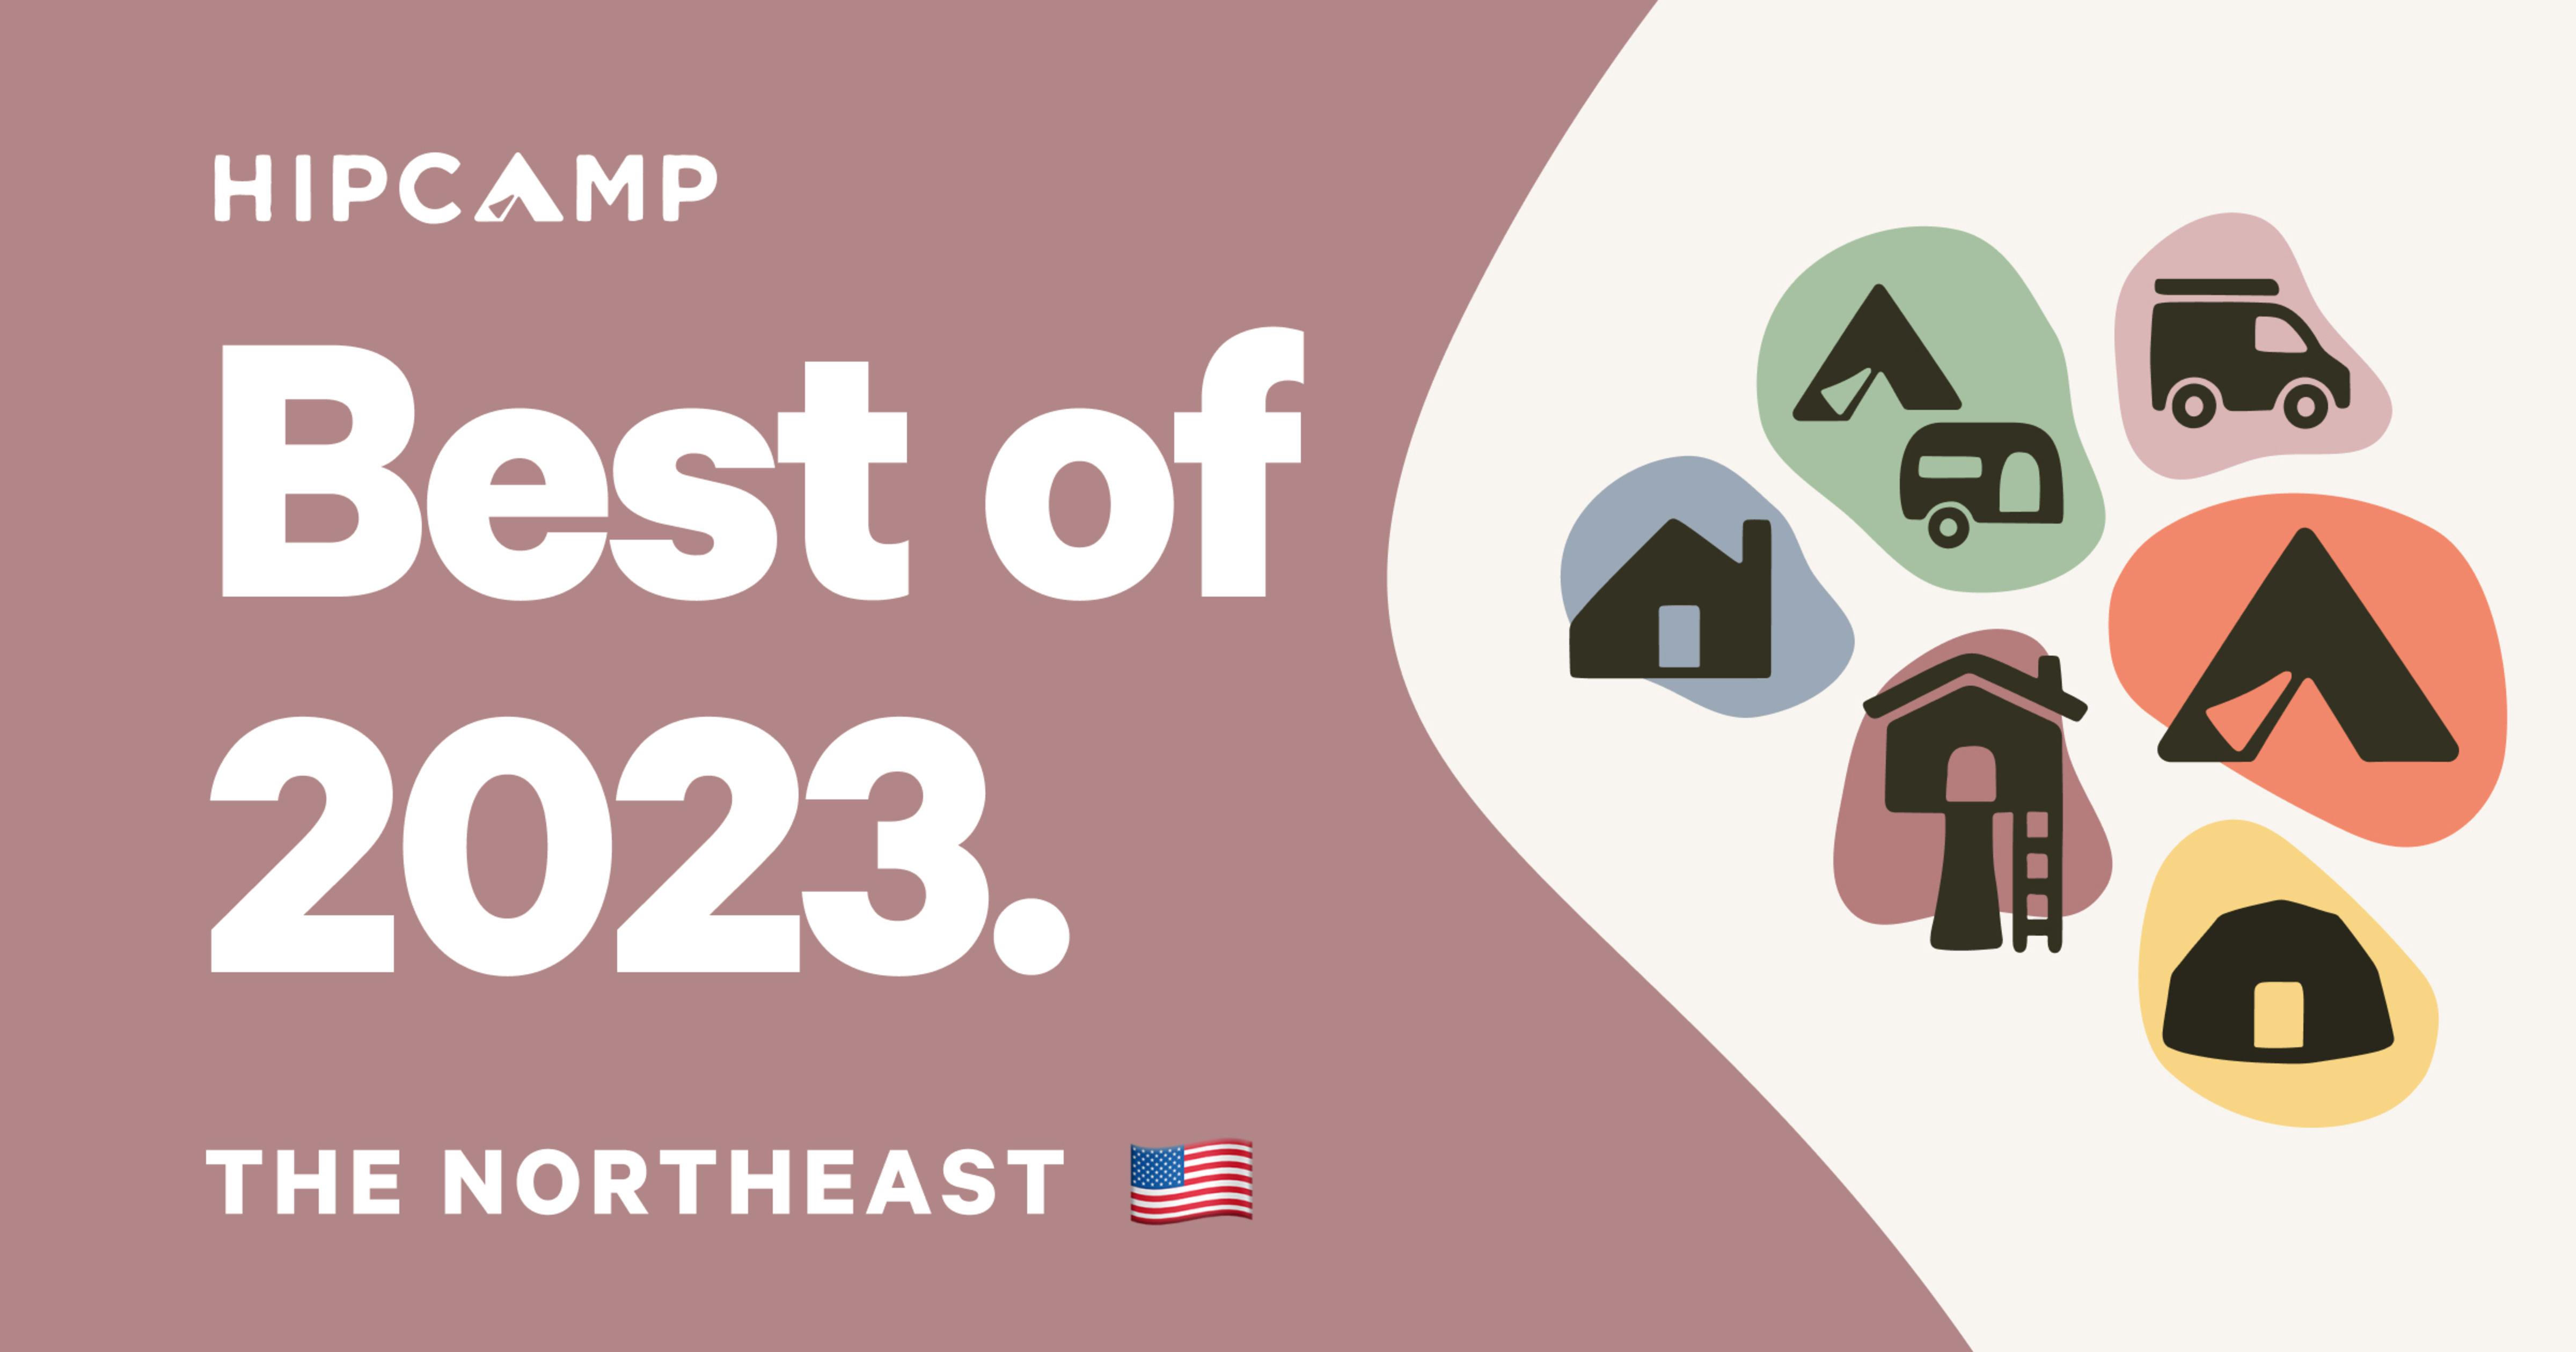 The Northeast’s Best Hipcamps to Visit in 2023